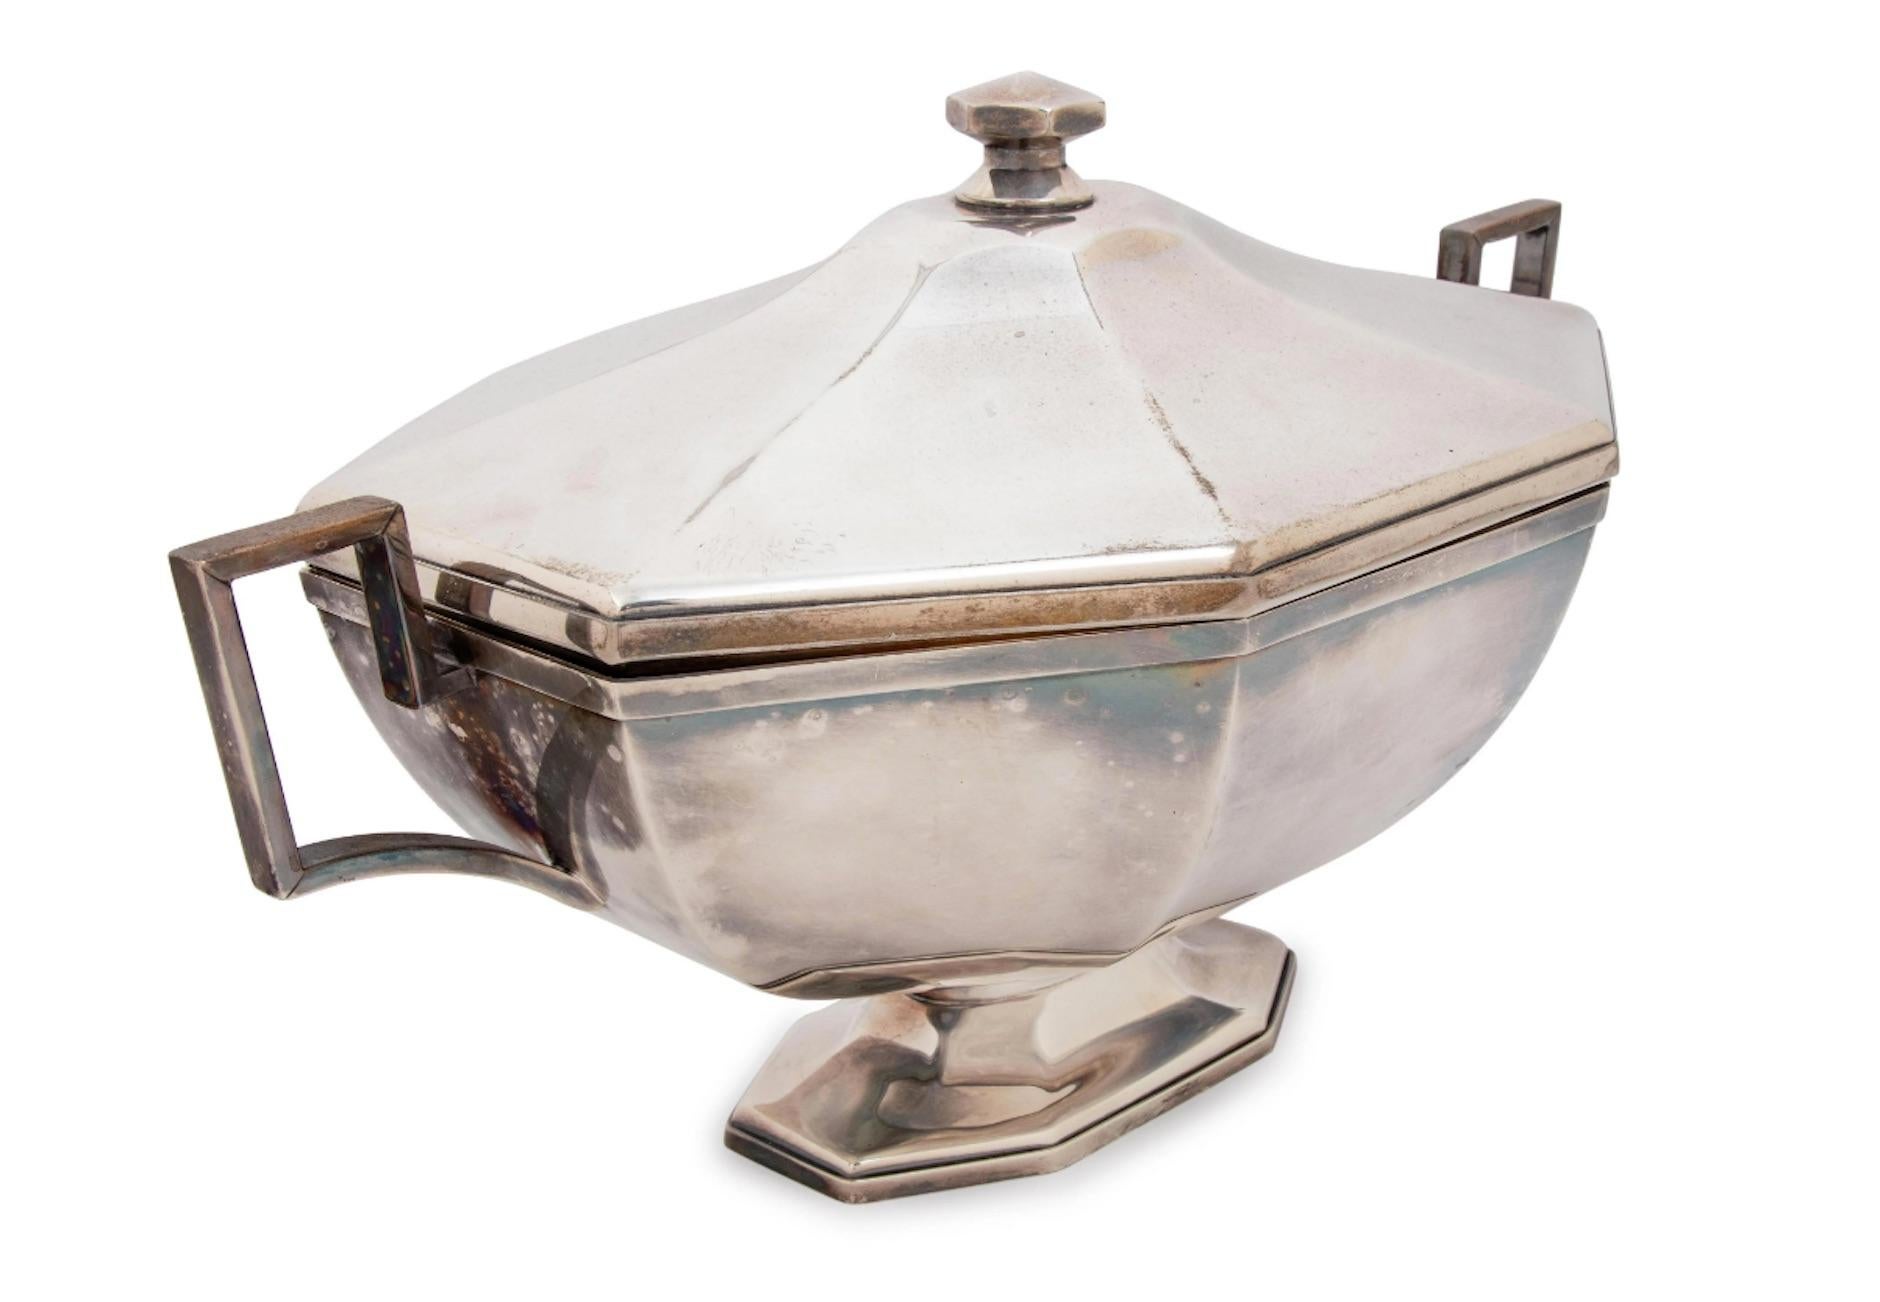 A silver plate tureen, great scale, form and simplicity. A deffinate statement piece.
Measures: Height 10 1/2 x width 19 x depth 10 inches.